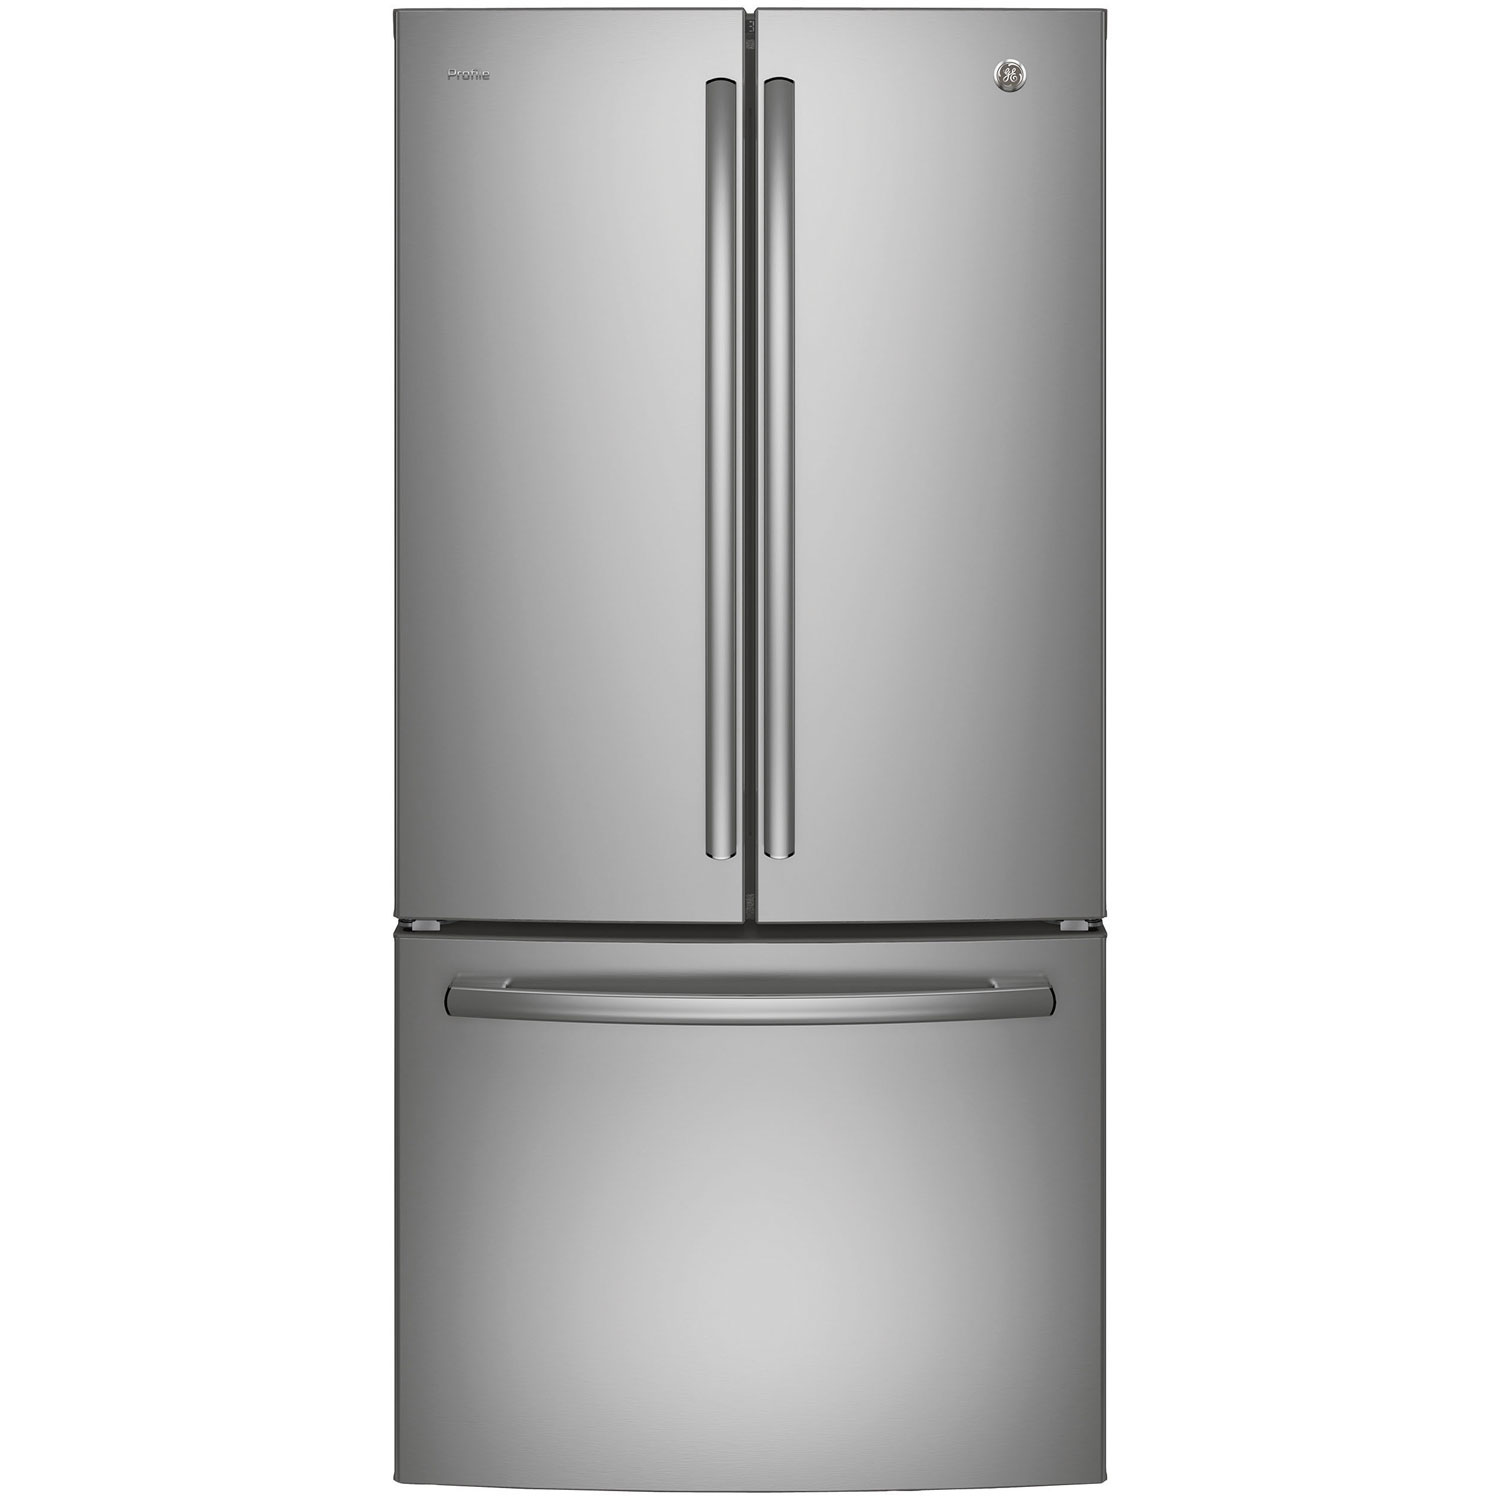 GE Profile 33" French Door Refrigerator (PNE25NSLKSS) - Stainless Steel - Open Box-Perfect Condition